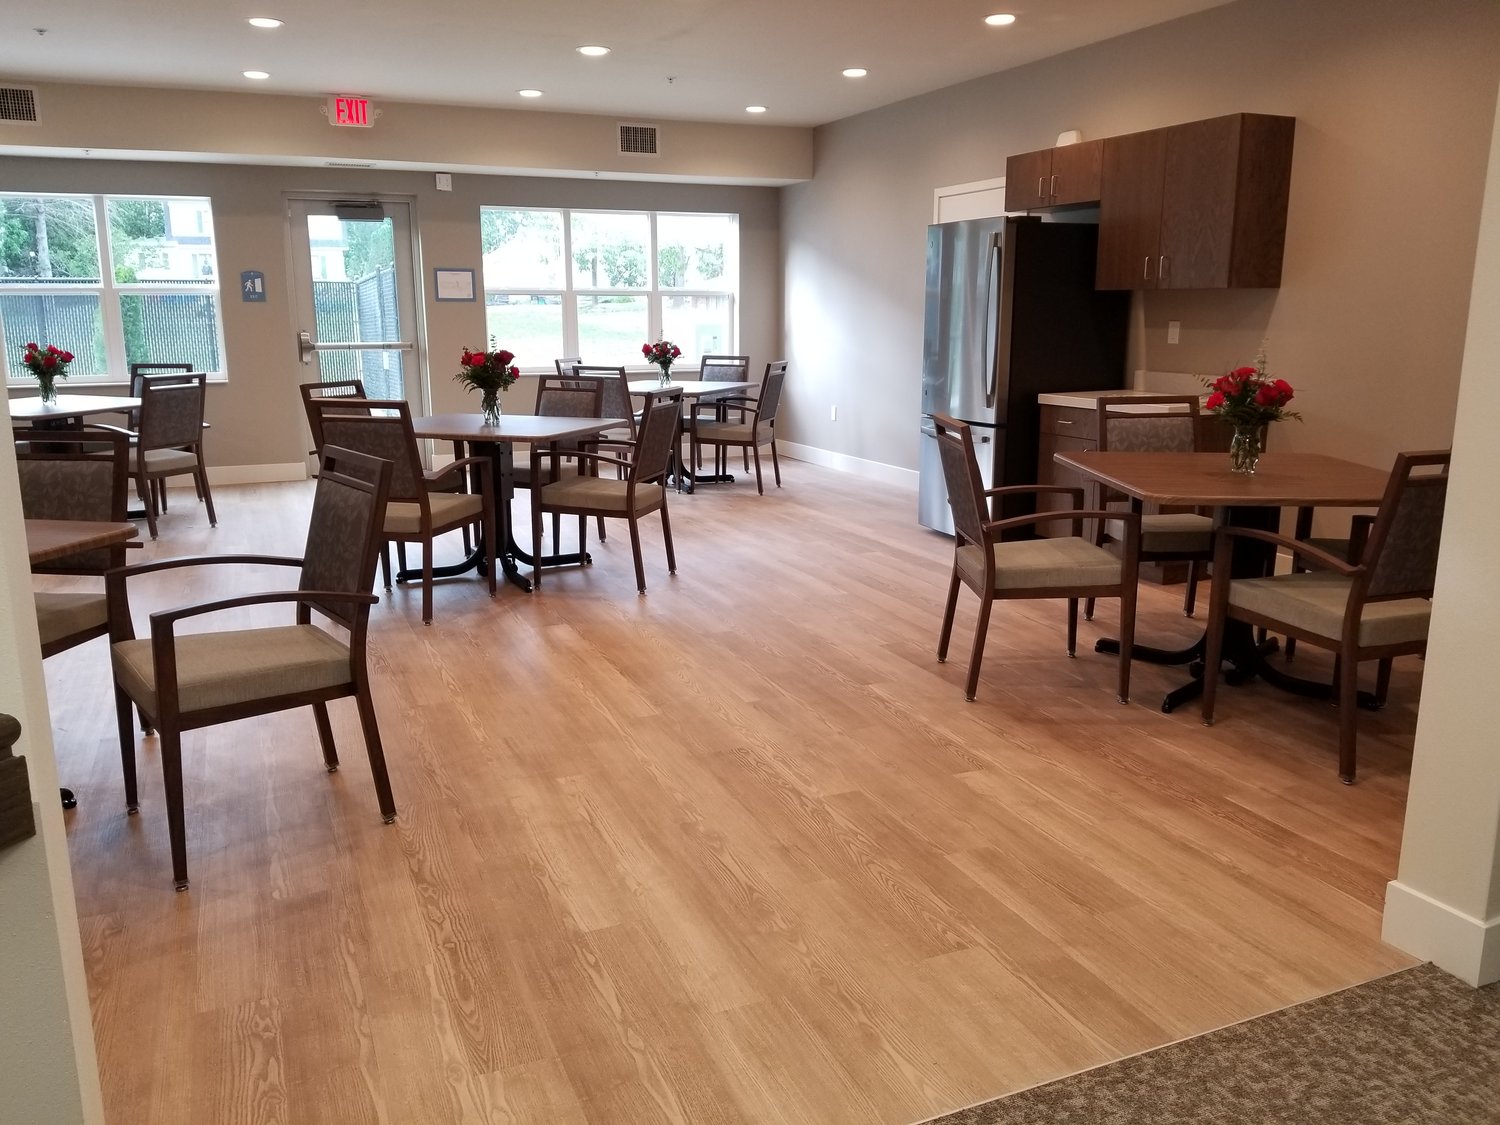 The common dining area ready for future residents of Goodhue Living.